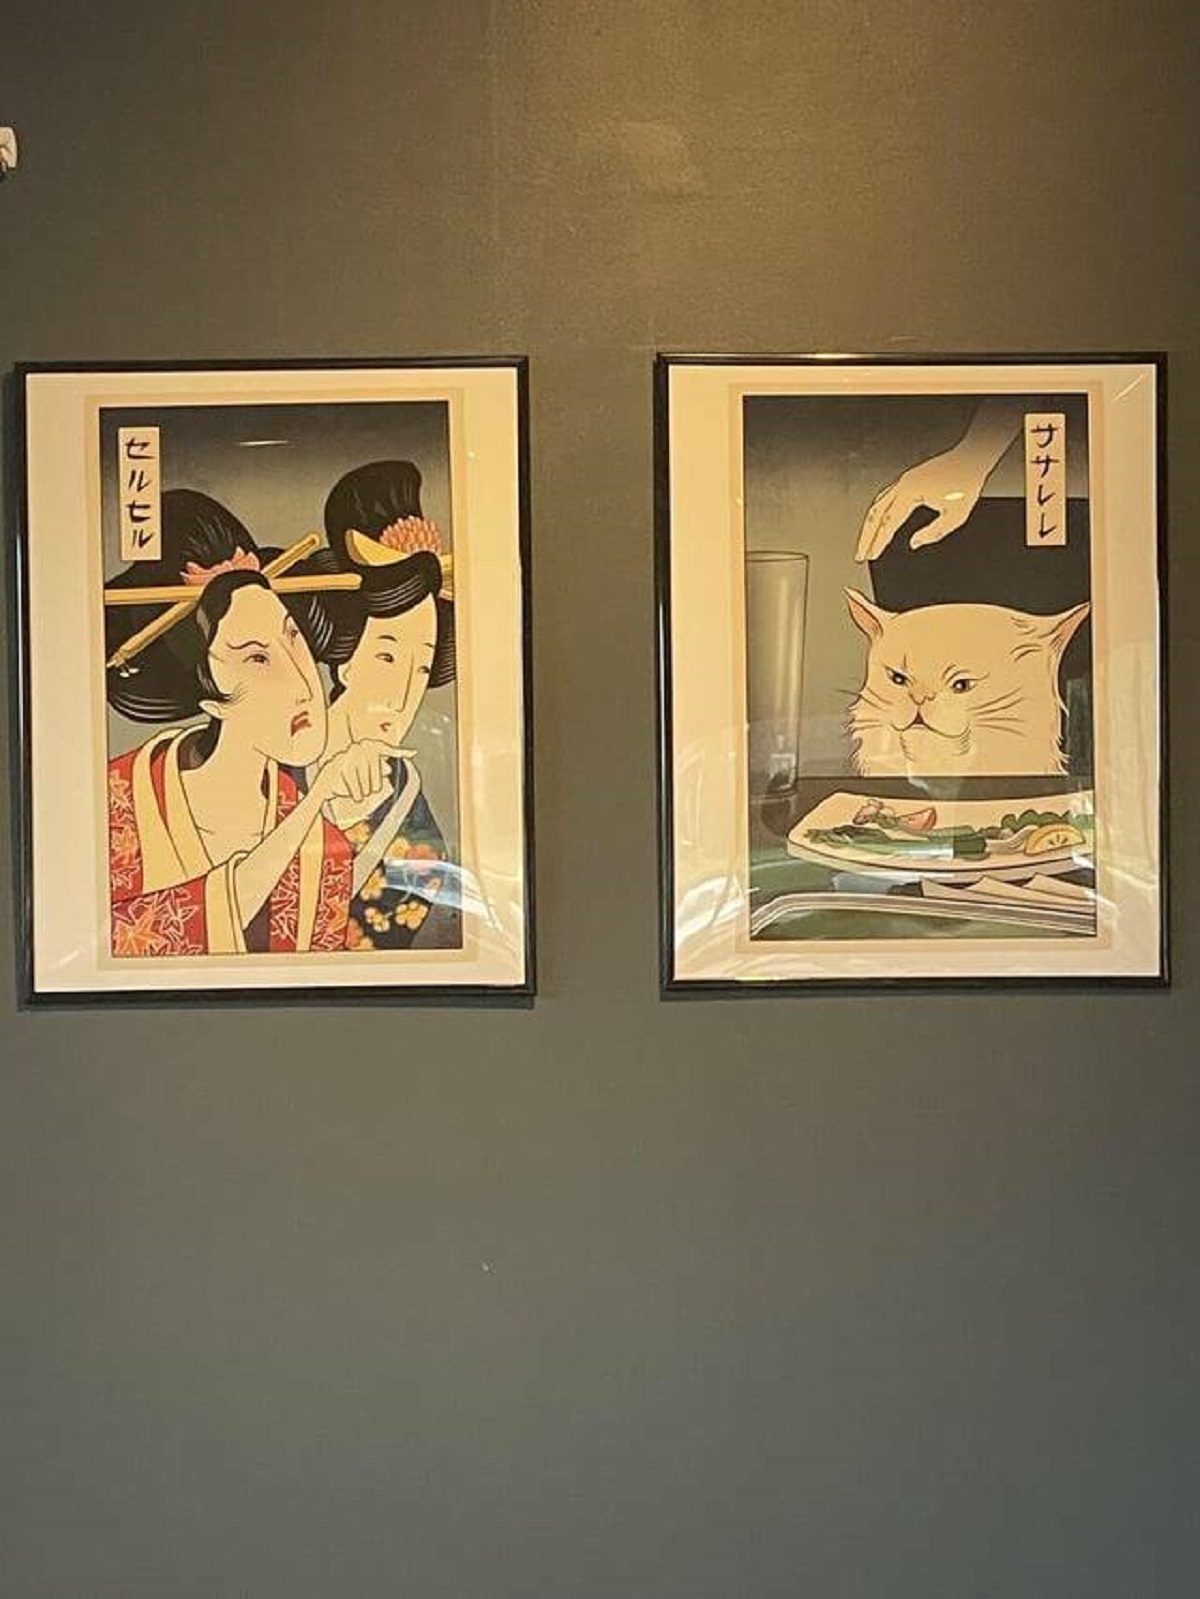 "My local sushi place has these meme paintings"